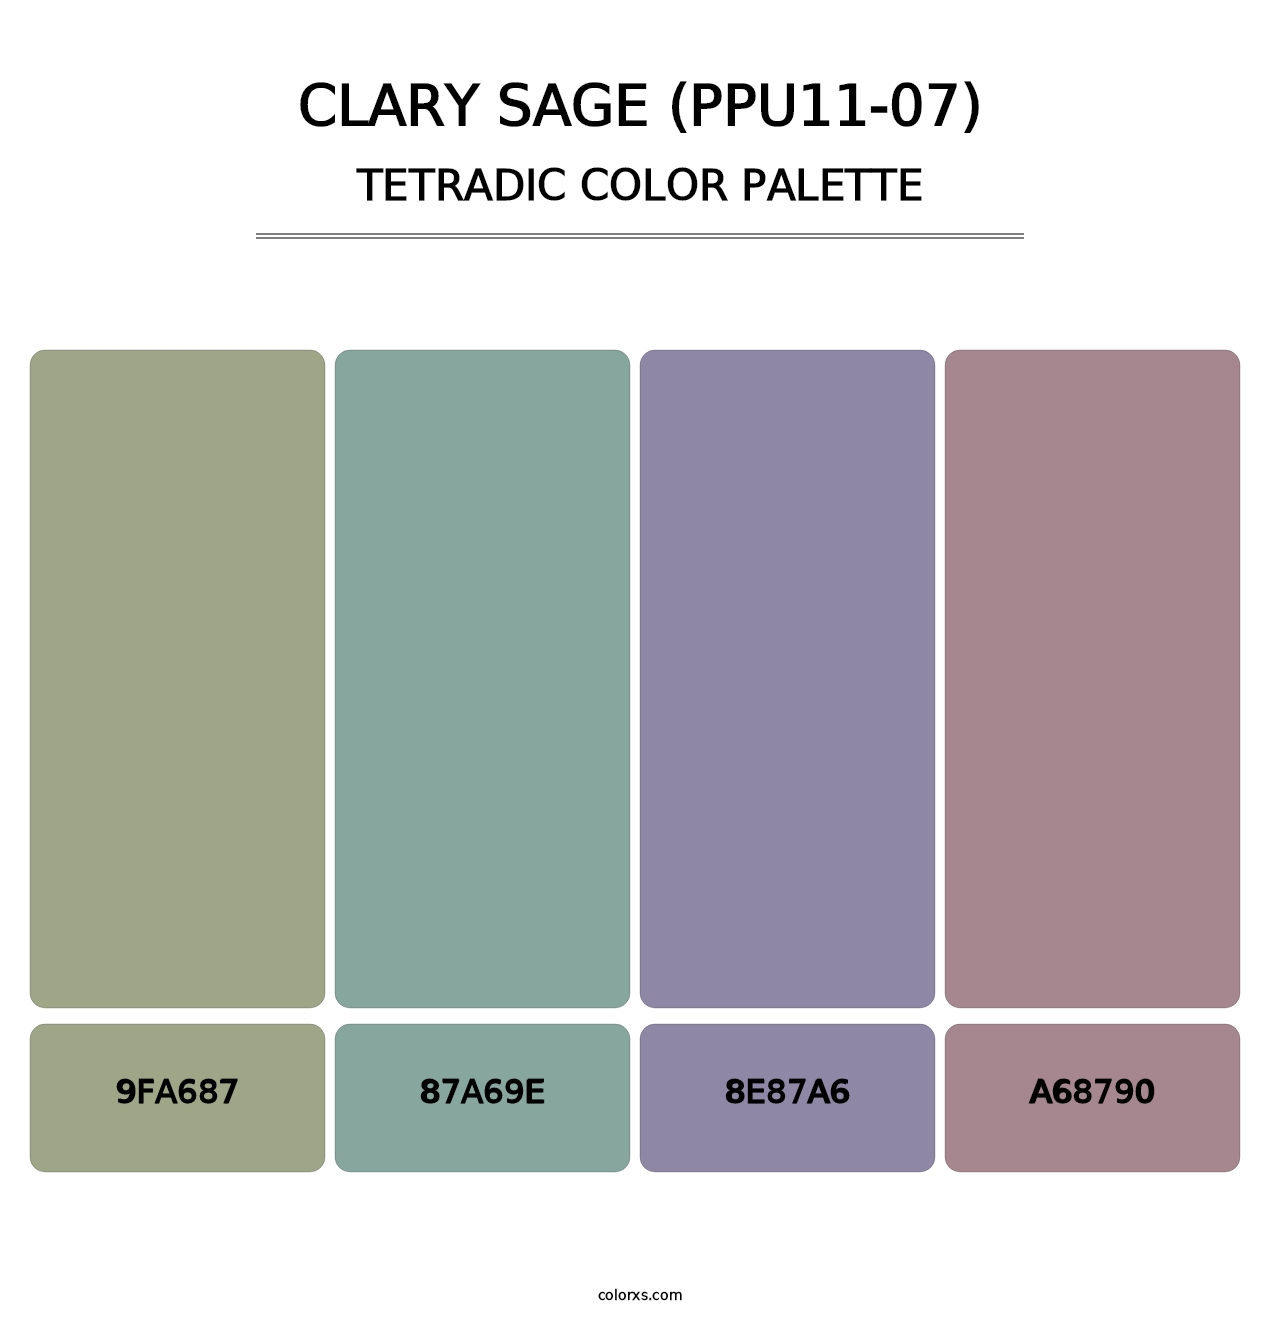 Clary Sage (PPU11-07) - Tetradic Color Palette